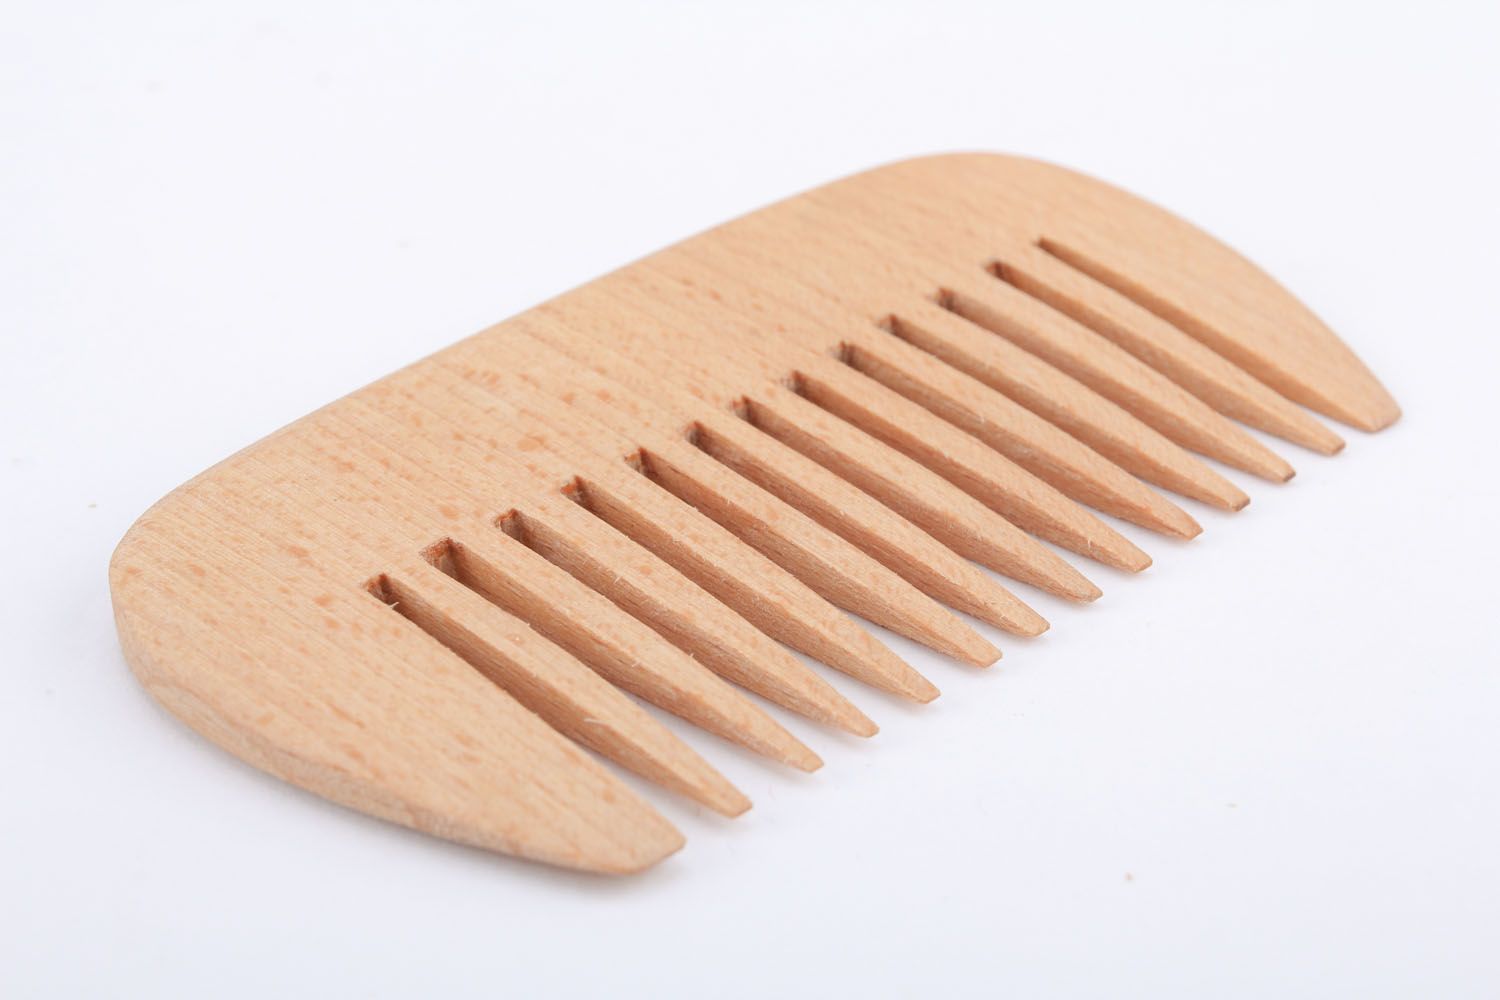 Homemade wooden comb photo 3